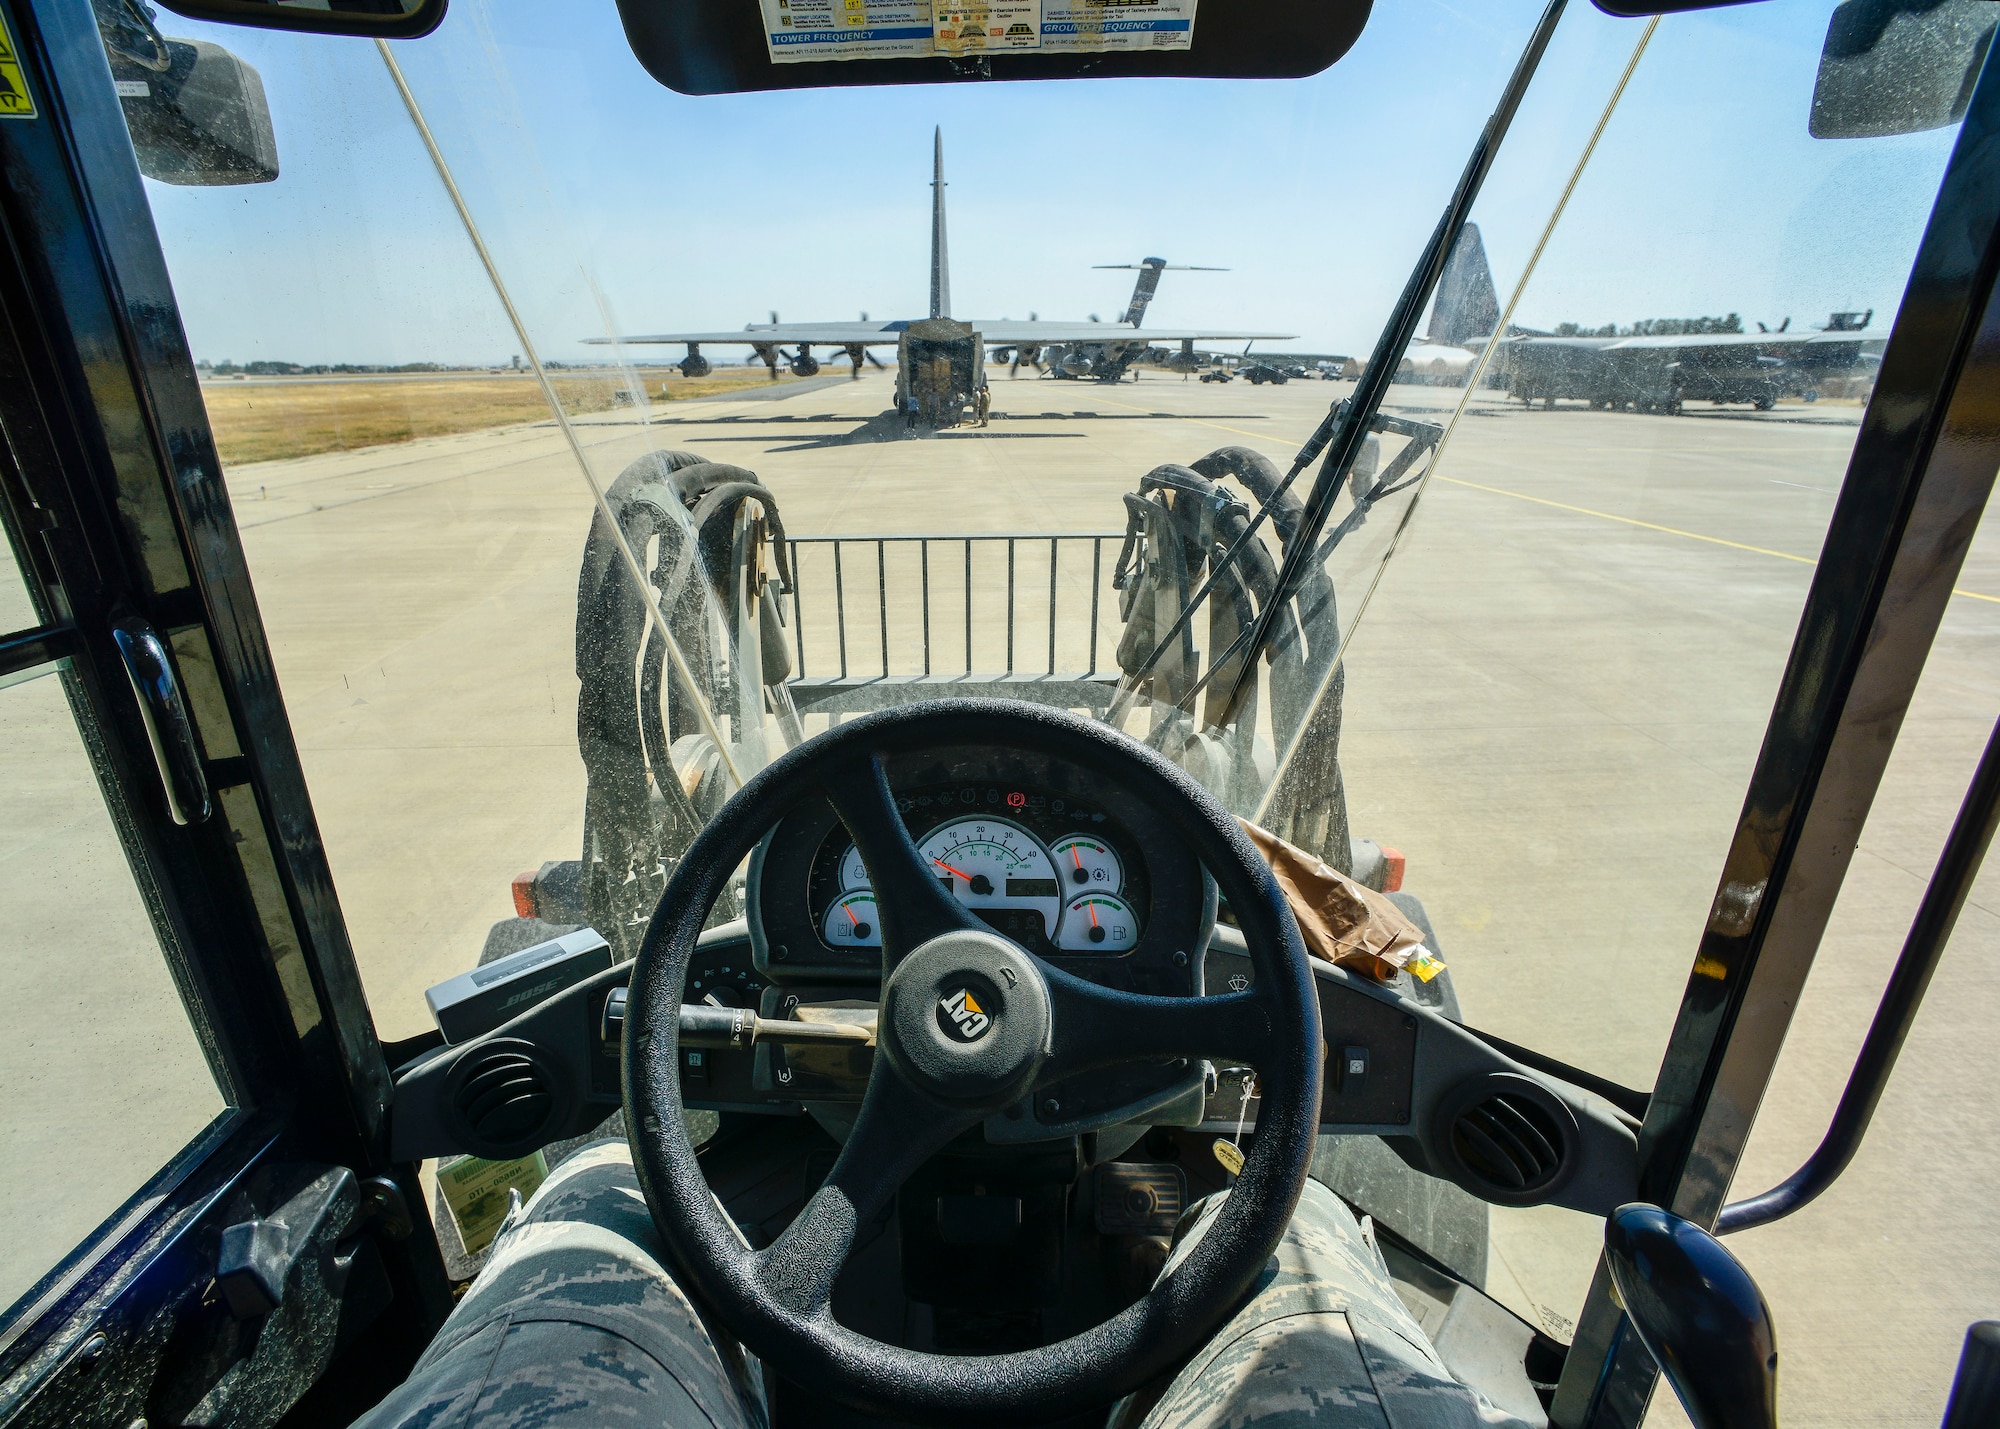 Airman 1st Class Christopher McDade, 435th Contingency Response Squadron air transportation journeyman, stands by to unload cargo off an HC-130J Combat King II, Sept. 28, 2015, at Diyarbakir Air Base, Turkey. Airmen from the 435th Contingency Response Group received more than 680 tons of equipment for base operations in support of U.S. Air Forces Central Command personnel recovery mission for Operation Inherent Resolve. (U.S. Air Force photo by Airman 1st Class Cory W. Bush/Released)